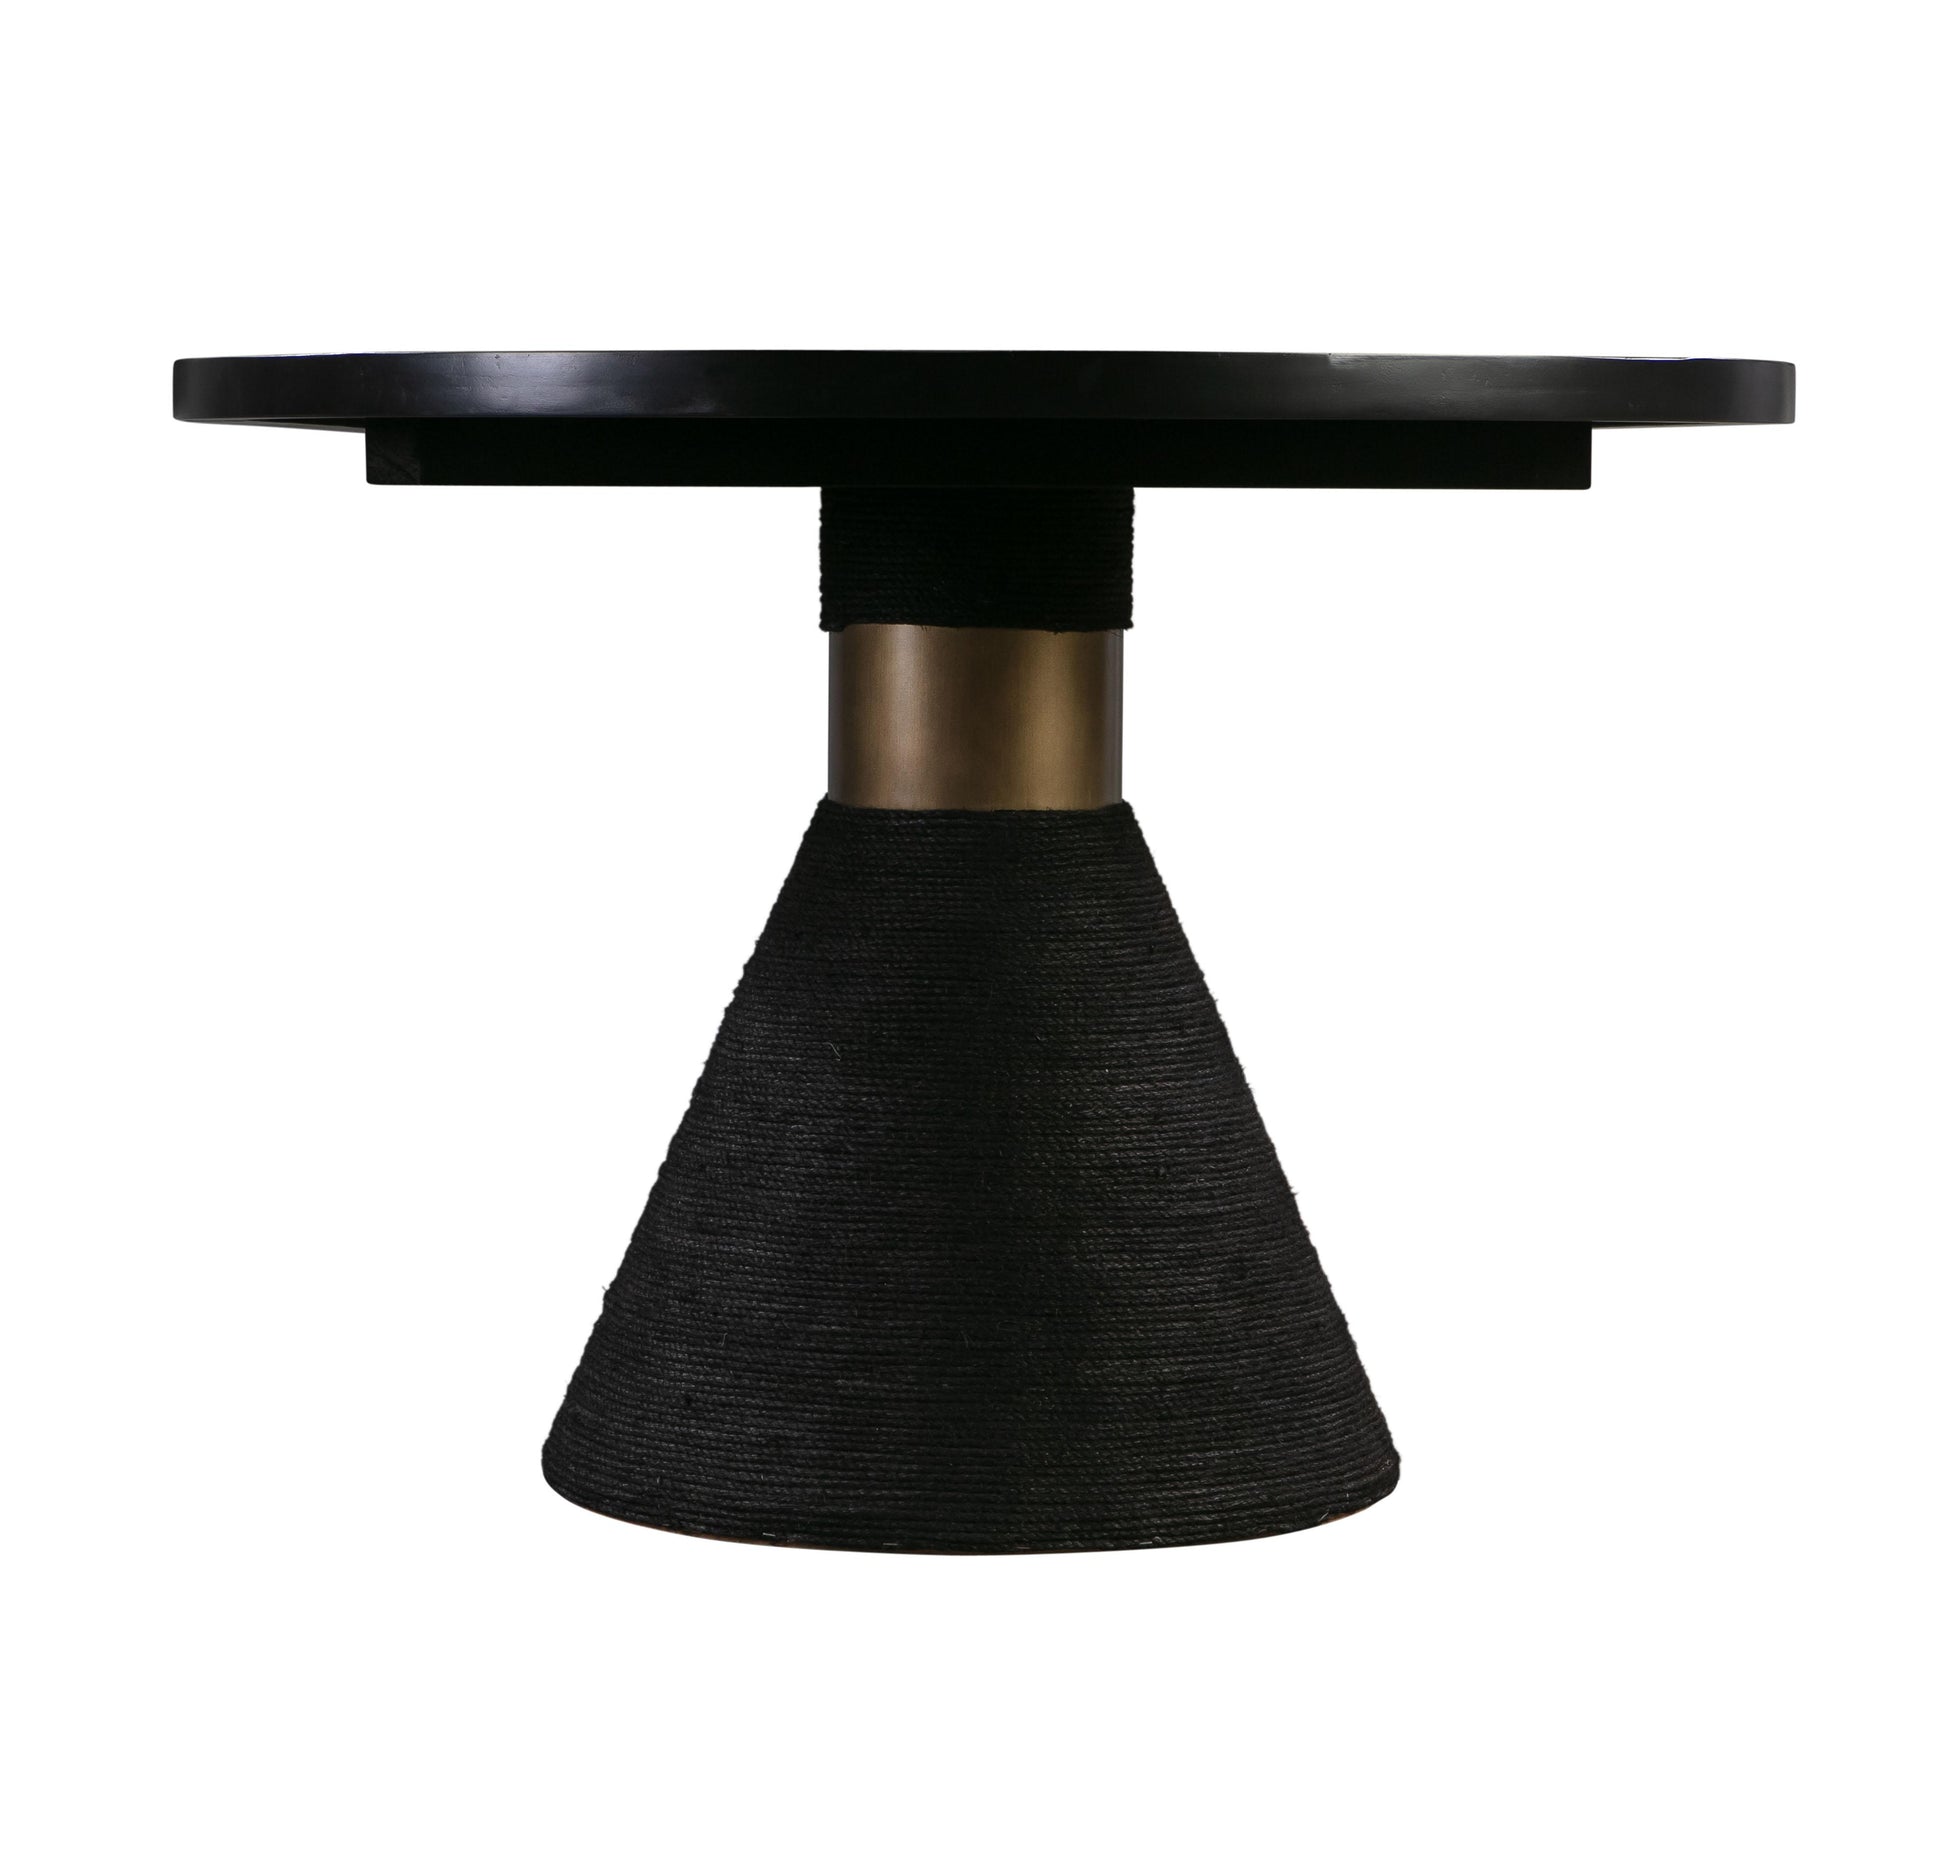 Rishi Black Rope Oval Table by TOV